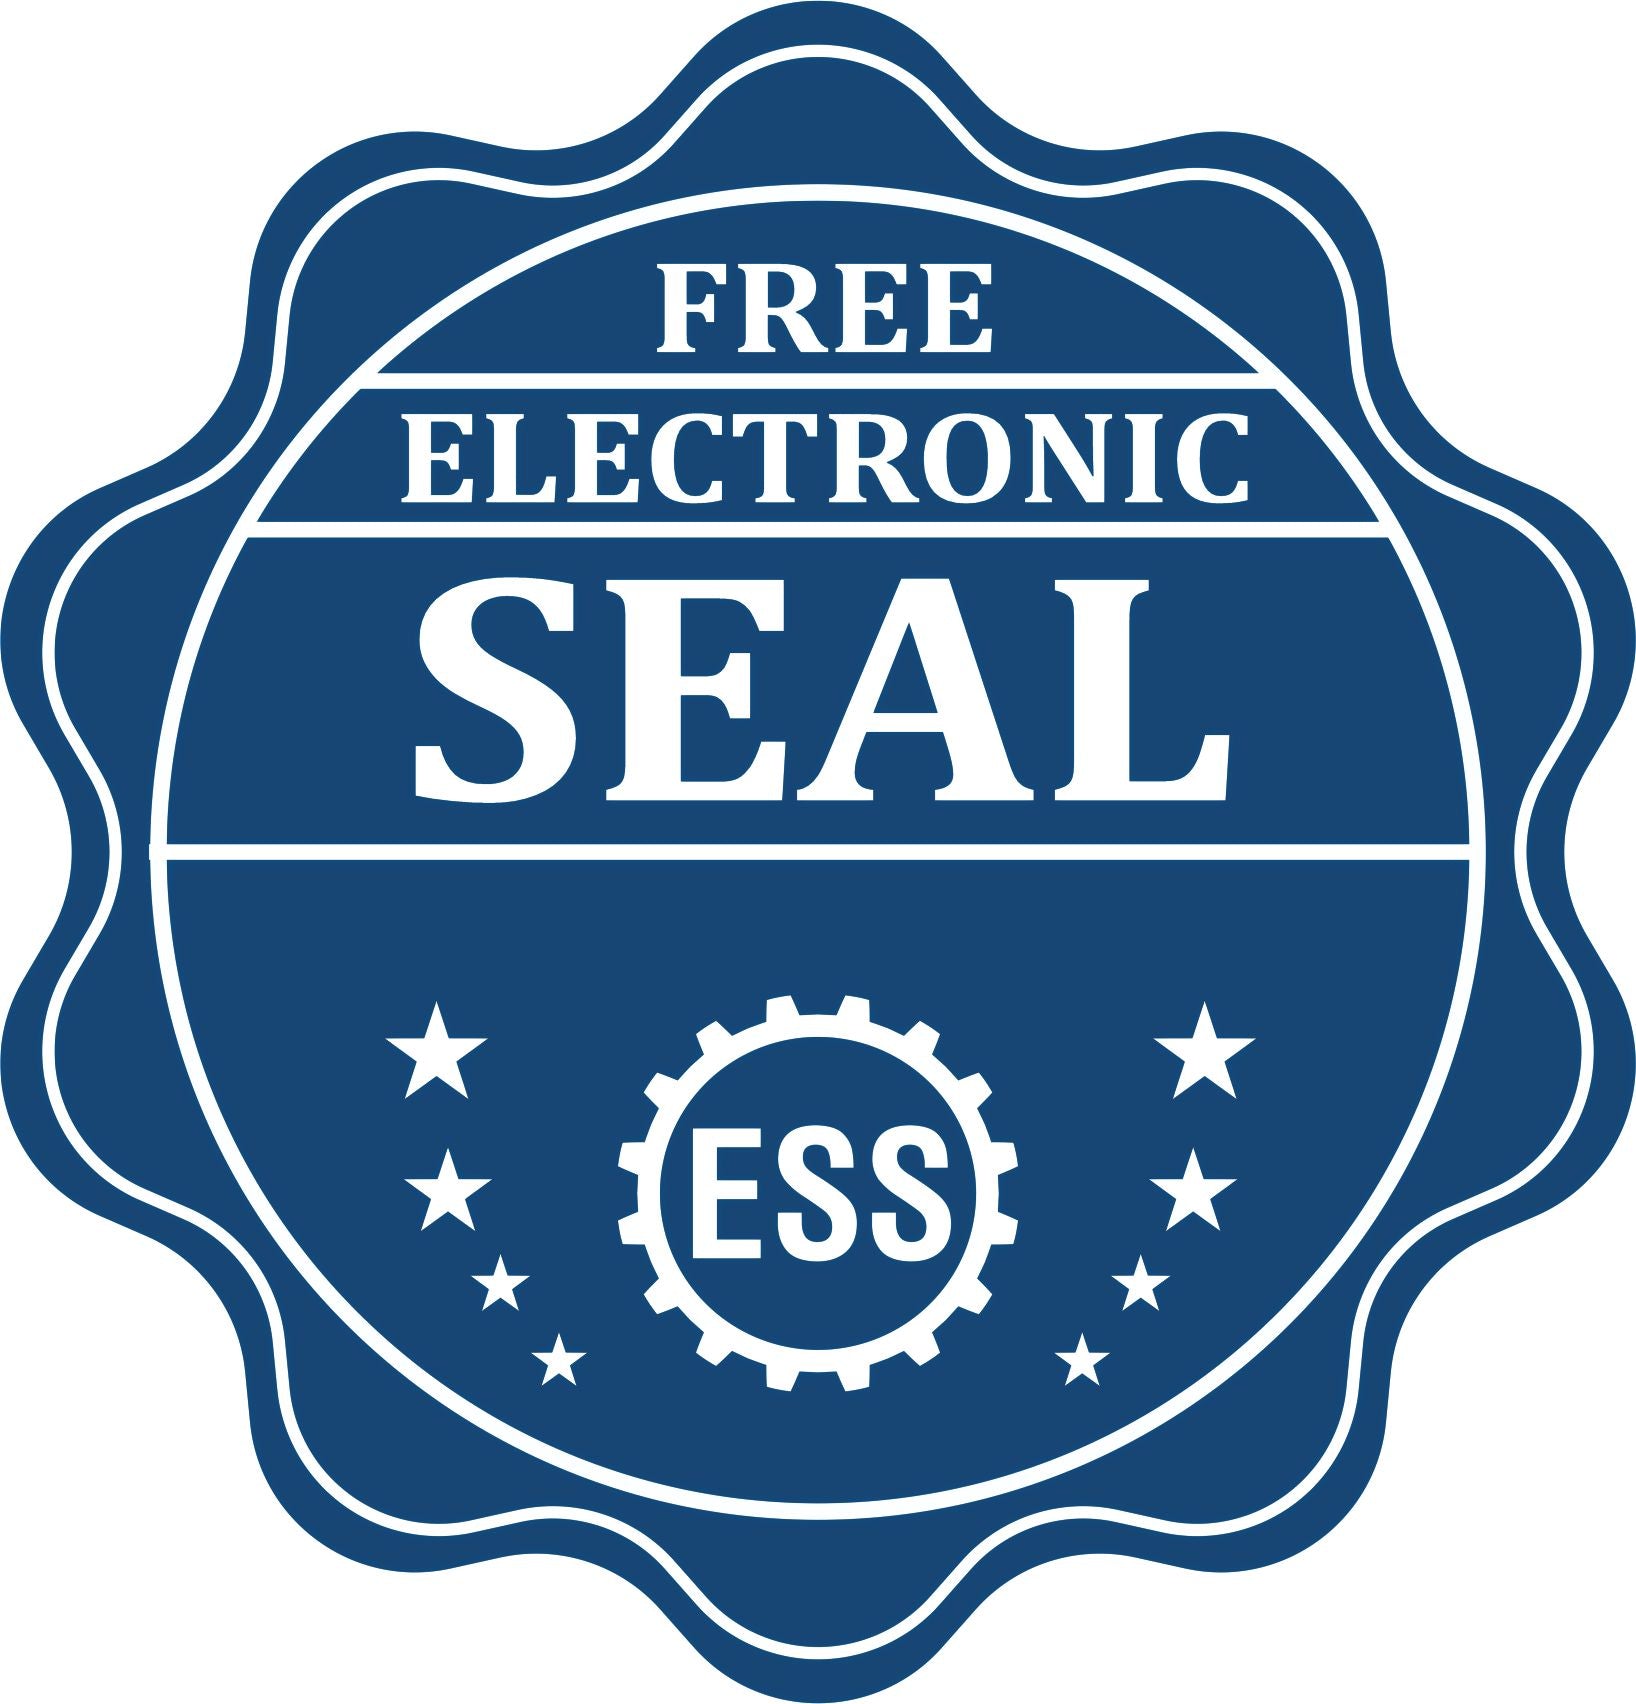 A badge showing a free electronic seal for the State of Michigan Long Reach Architectural Embossing Seal with stars and the ESS gear on the emblem.